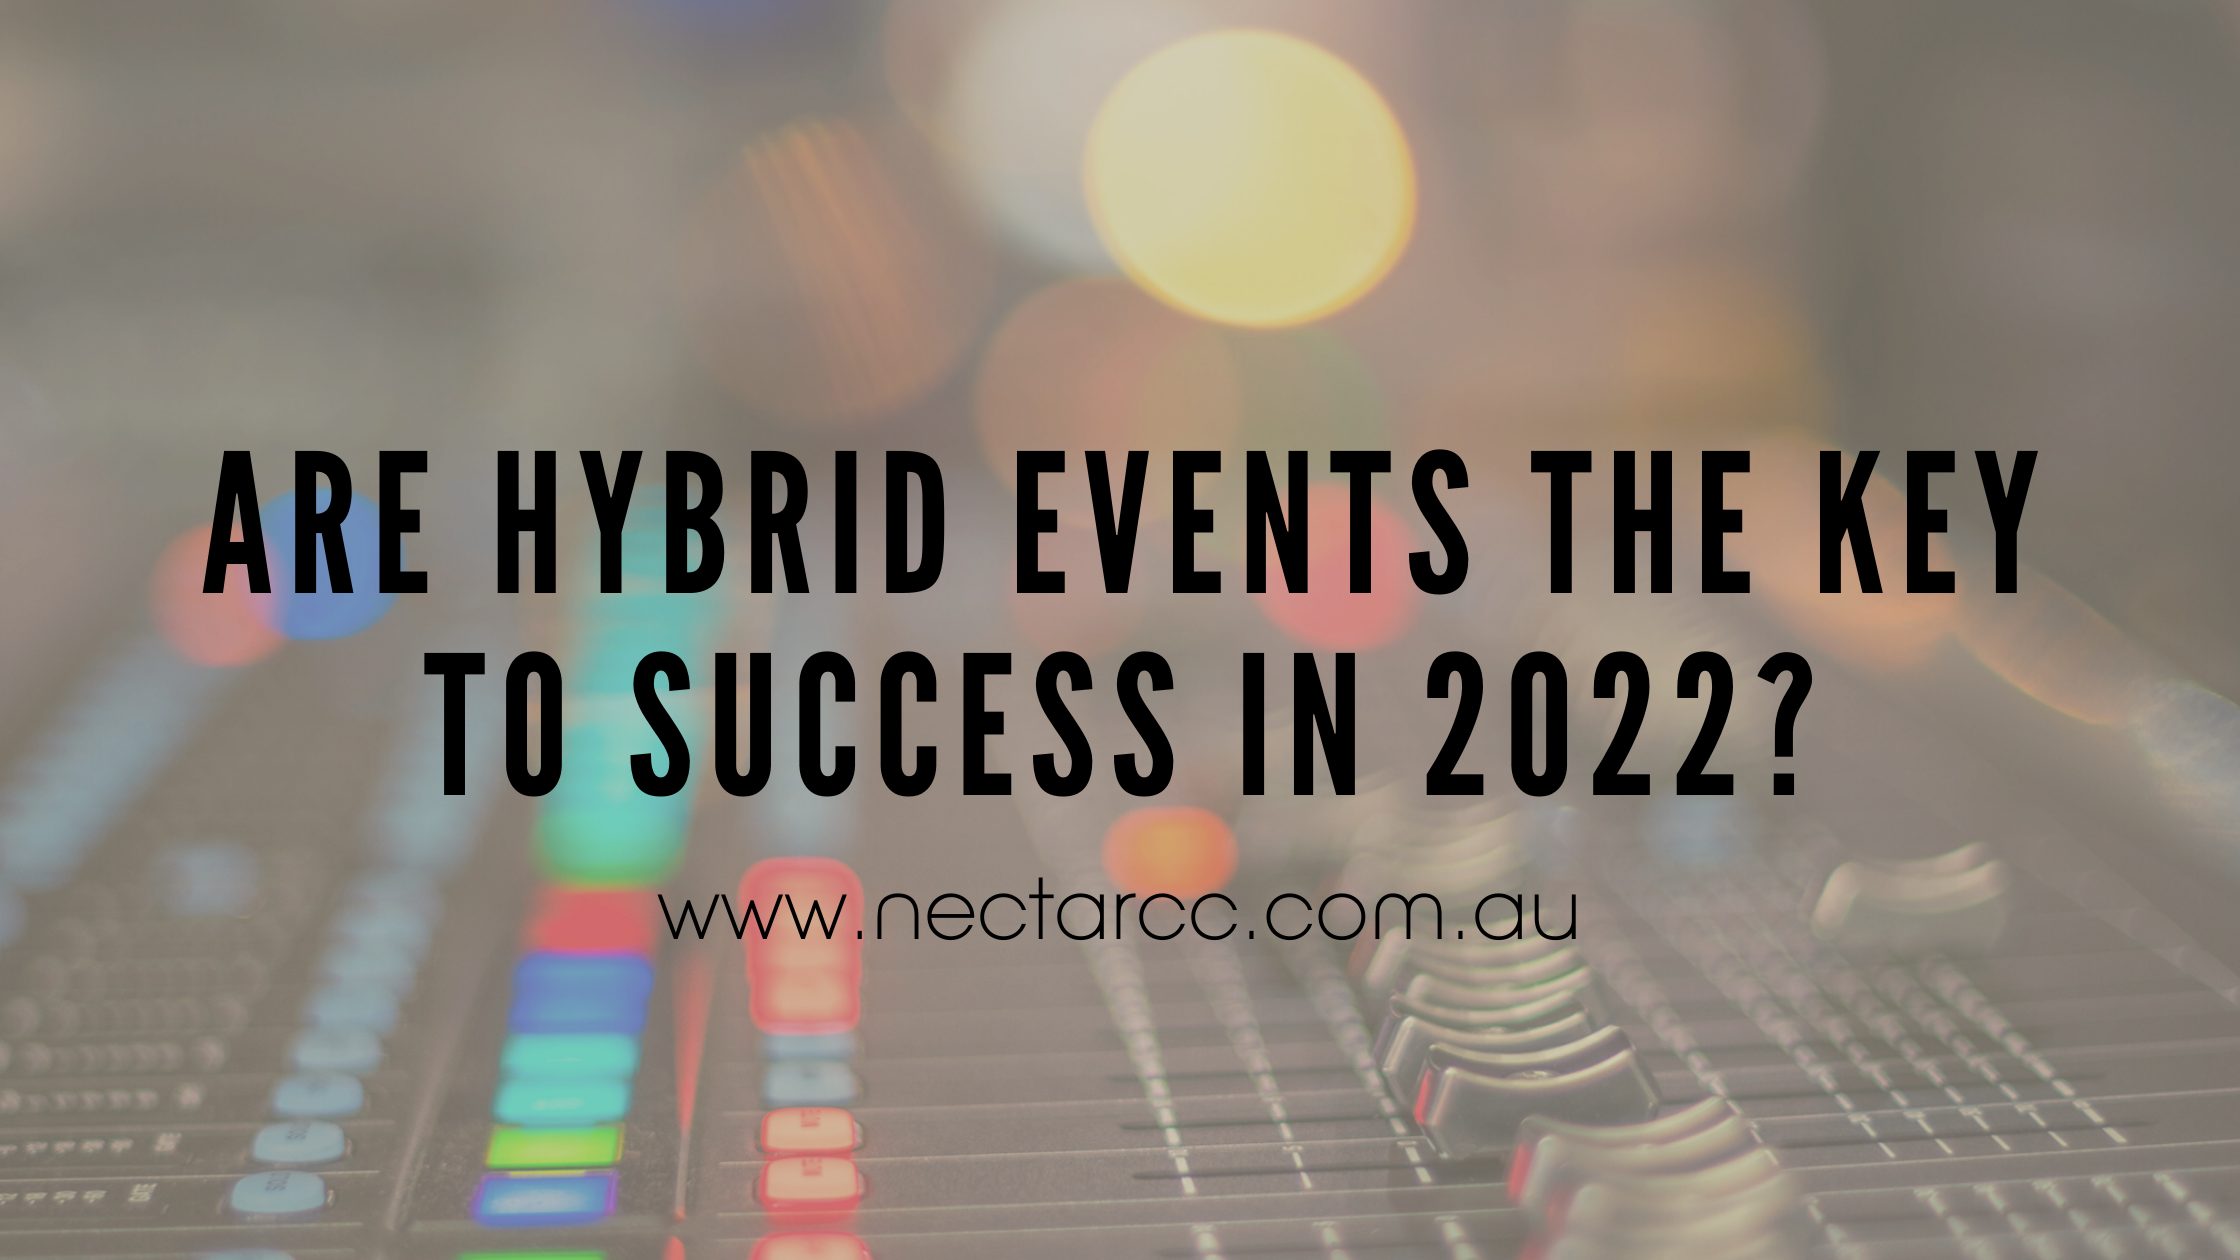 Are hybrid events the key to success in 2022?